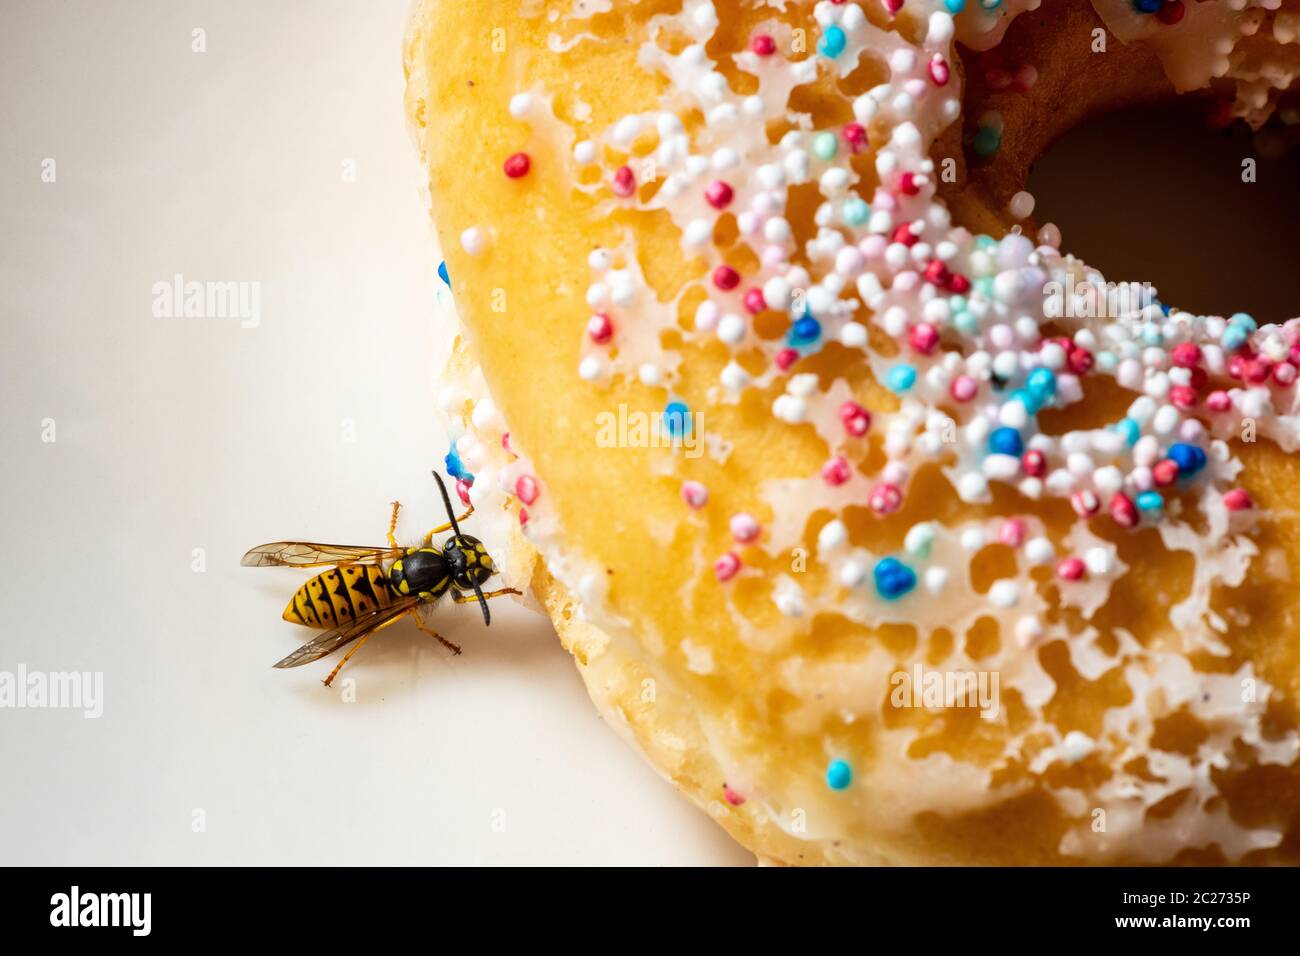 A Dangerous Wasp on Food Stock Photo